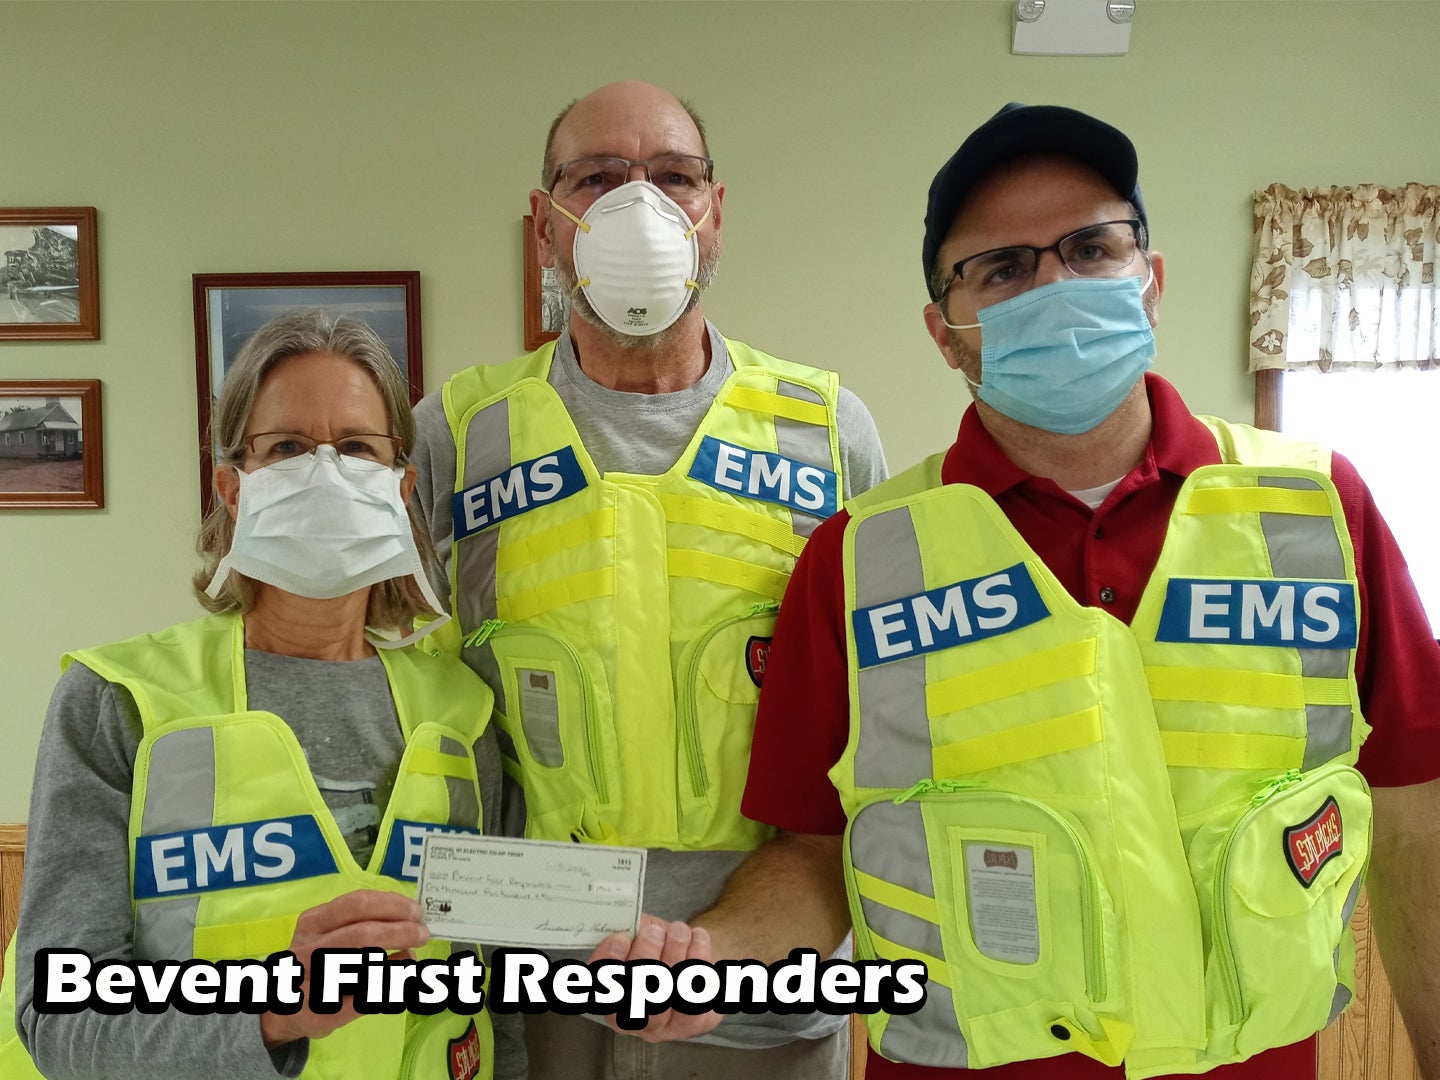 Bevent First Responders